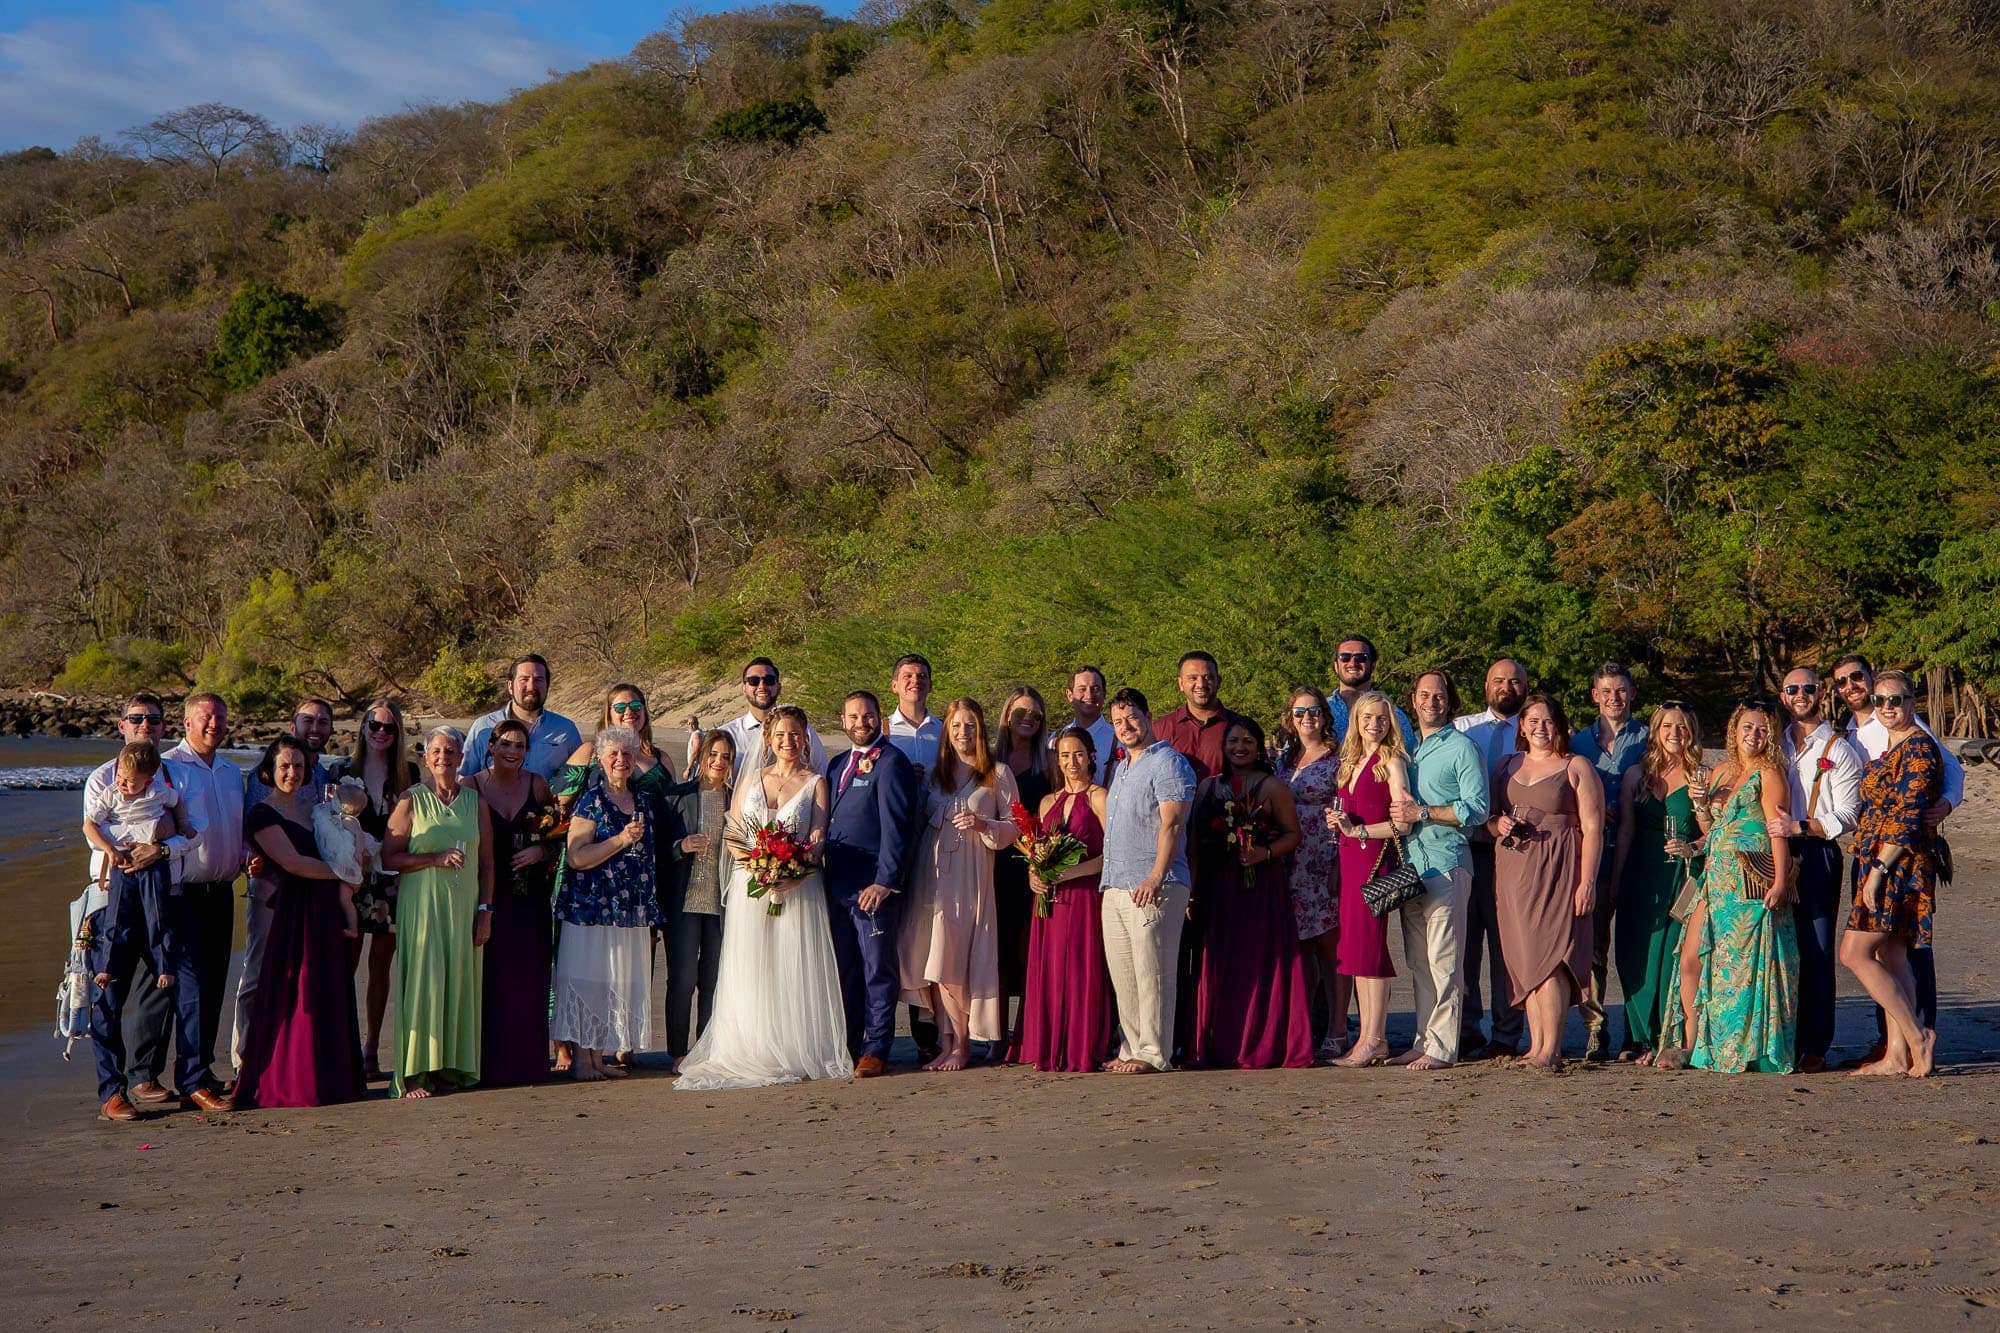 Group shot of the bridal party and guests at dreams las mareas all inclusive resort